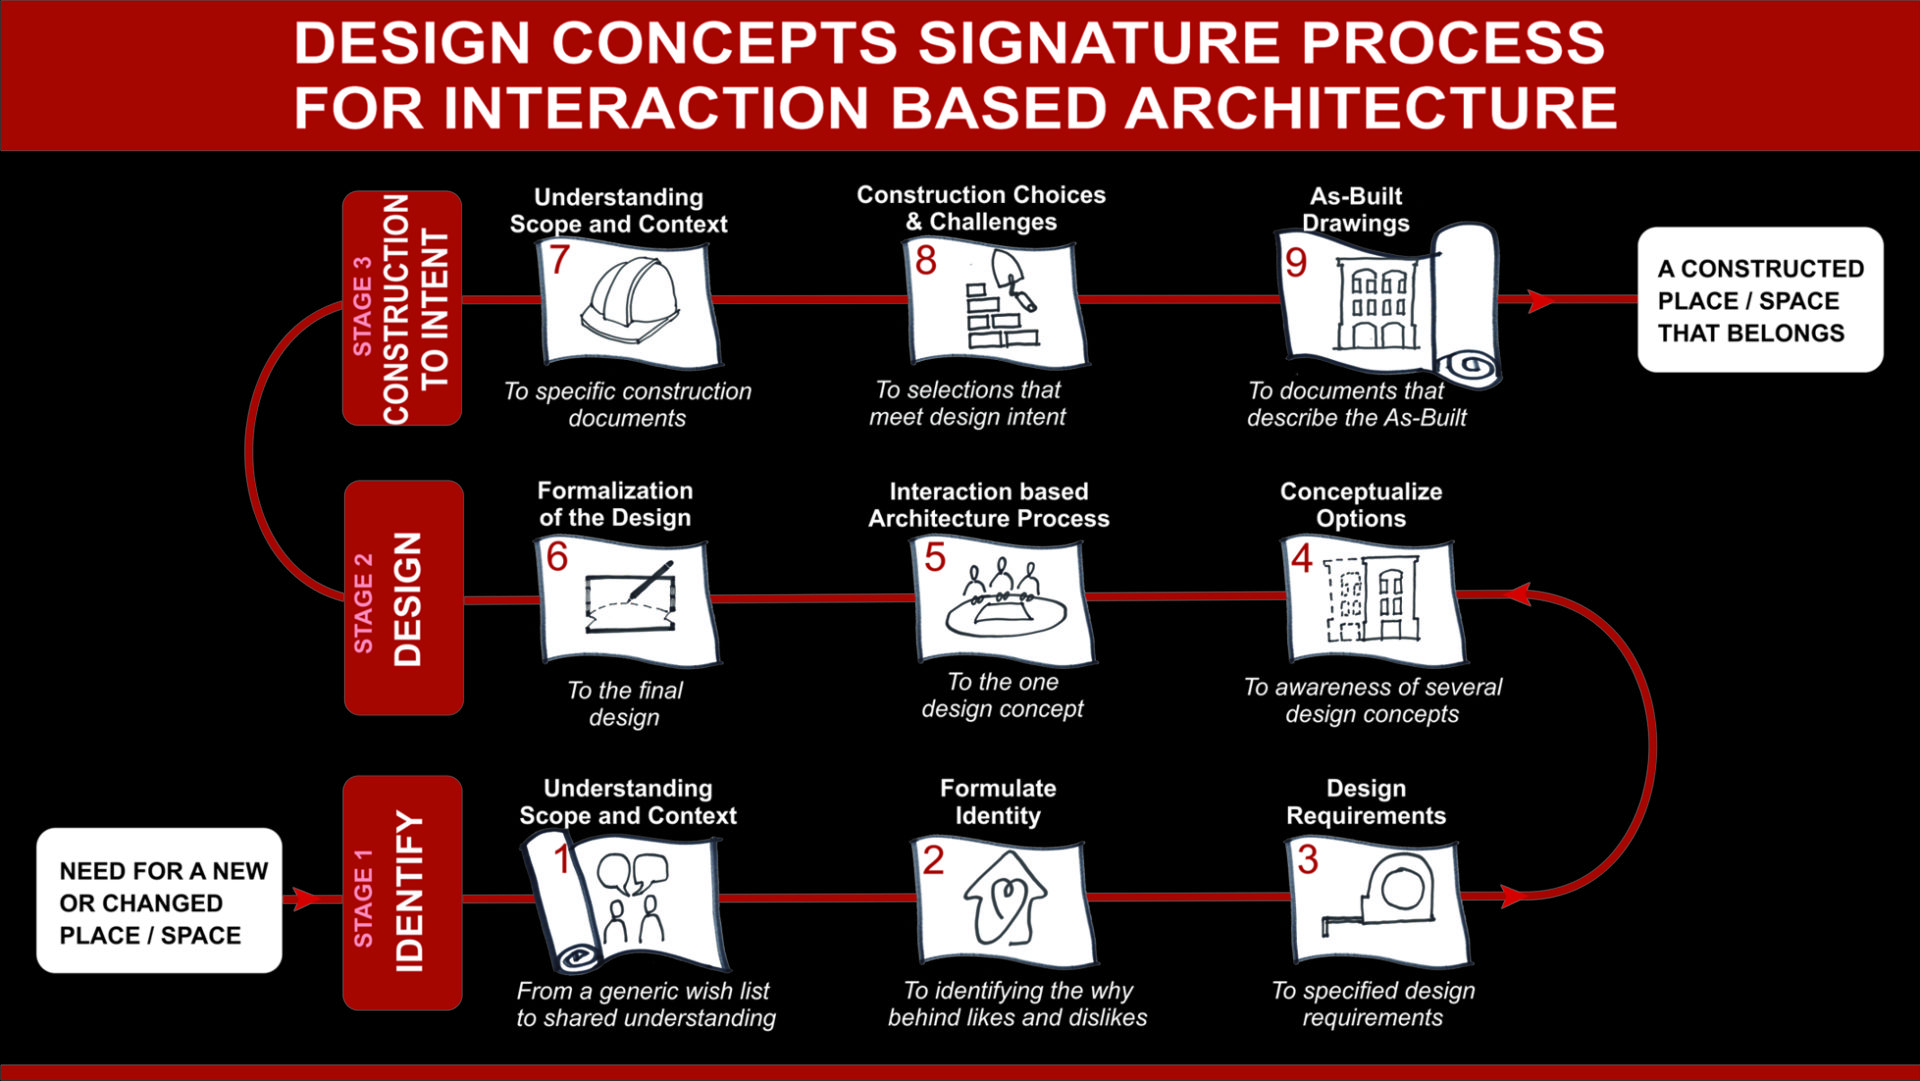 The process that describes how the architecture firm ONE DESIGN CONCEPTS works with it's clients